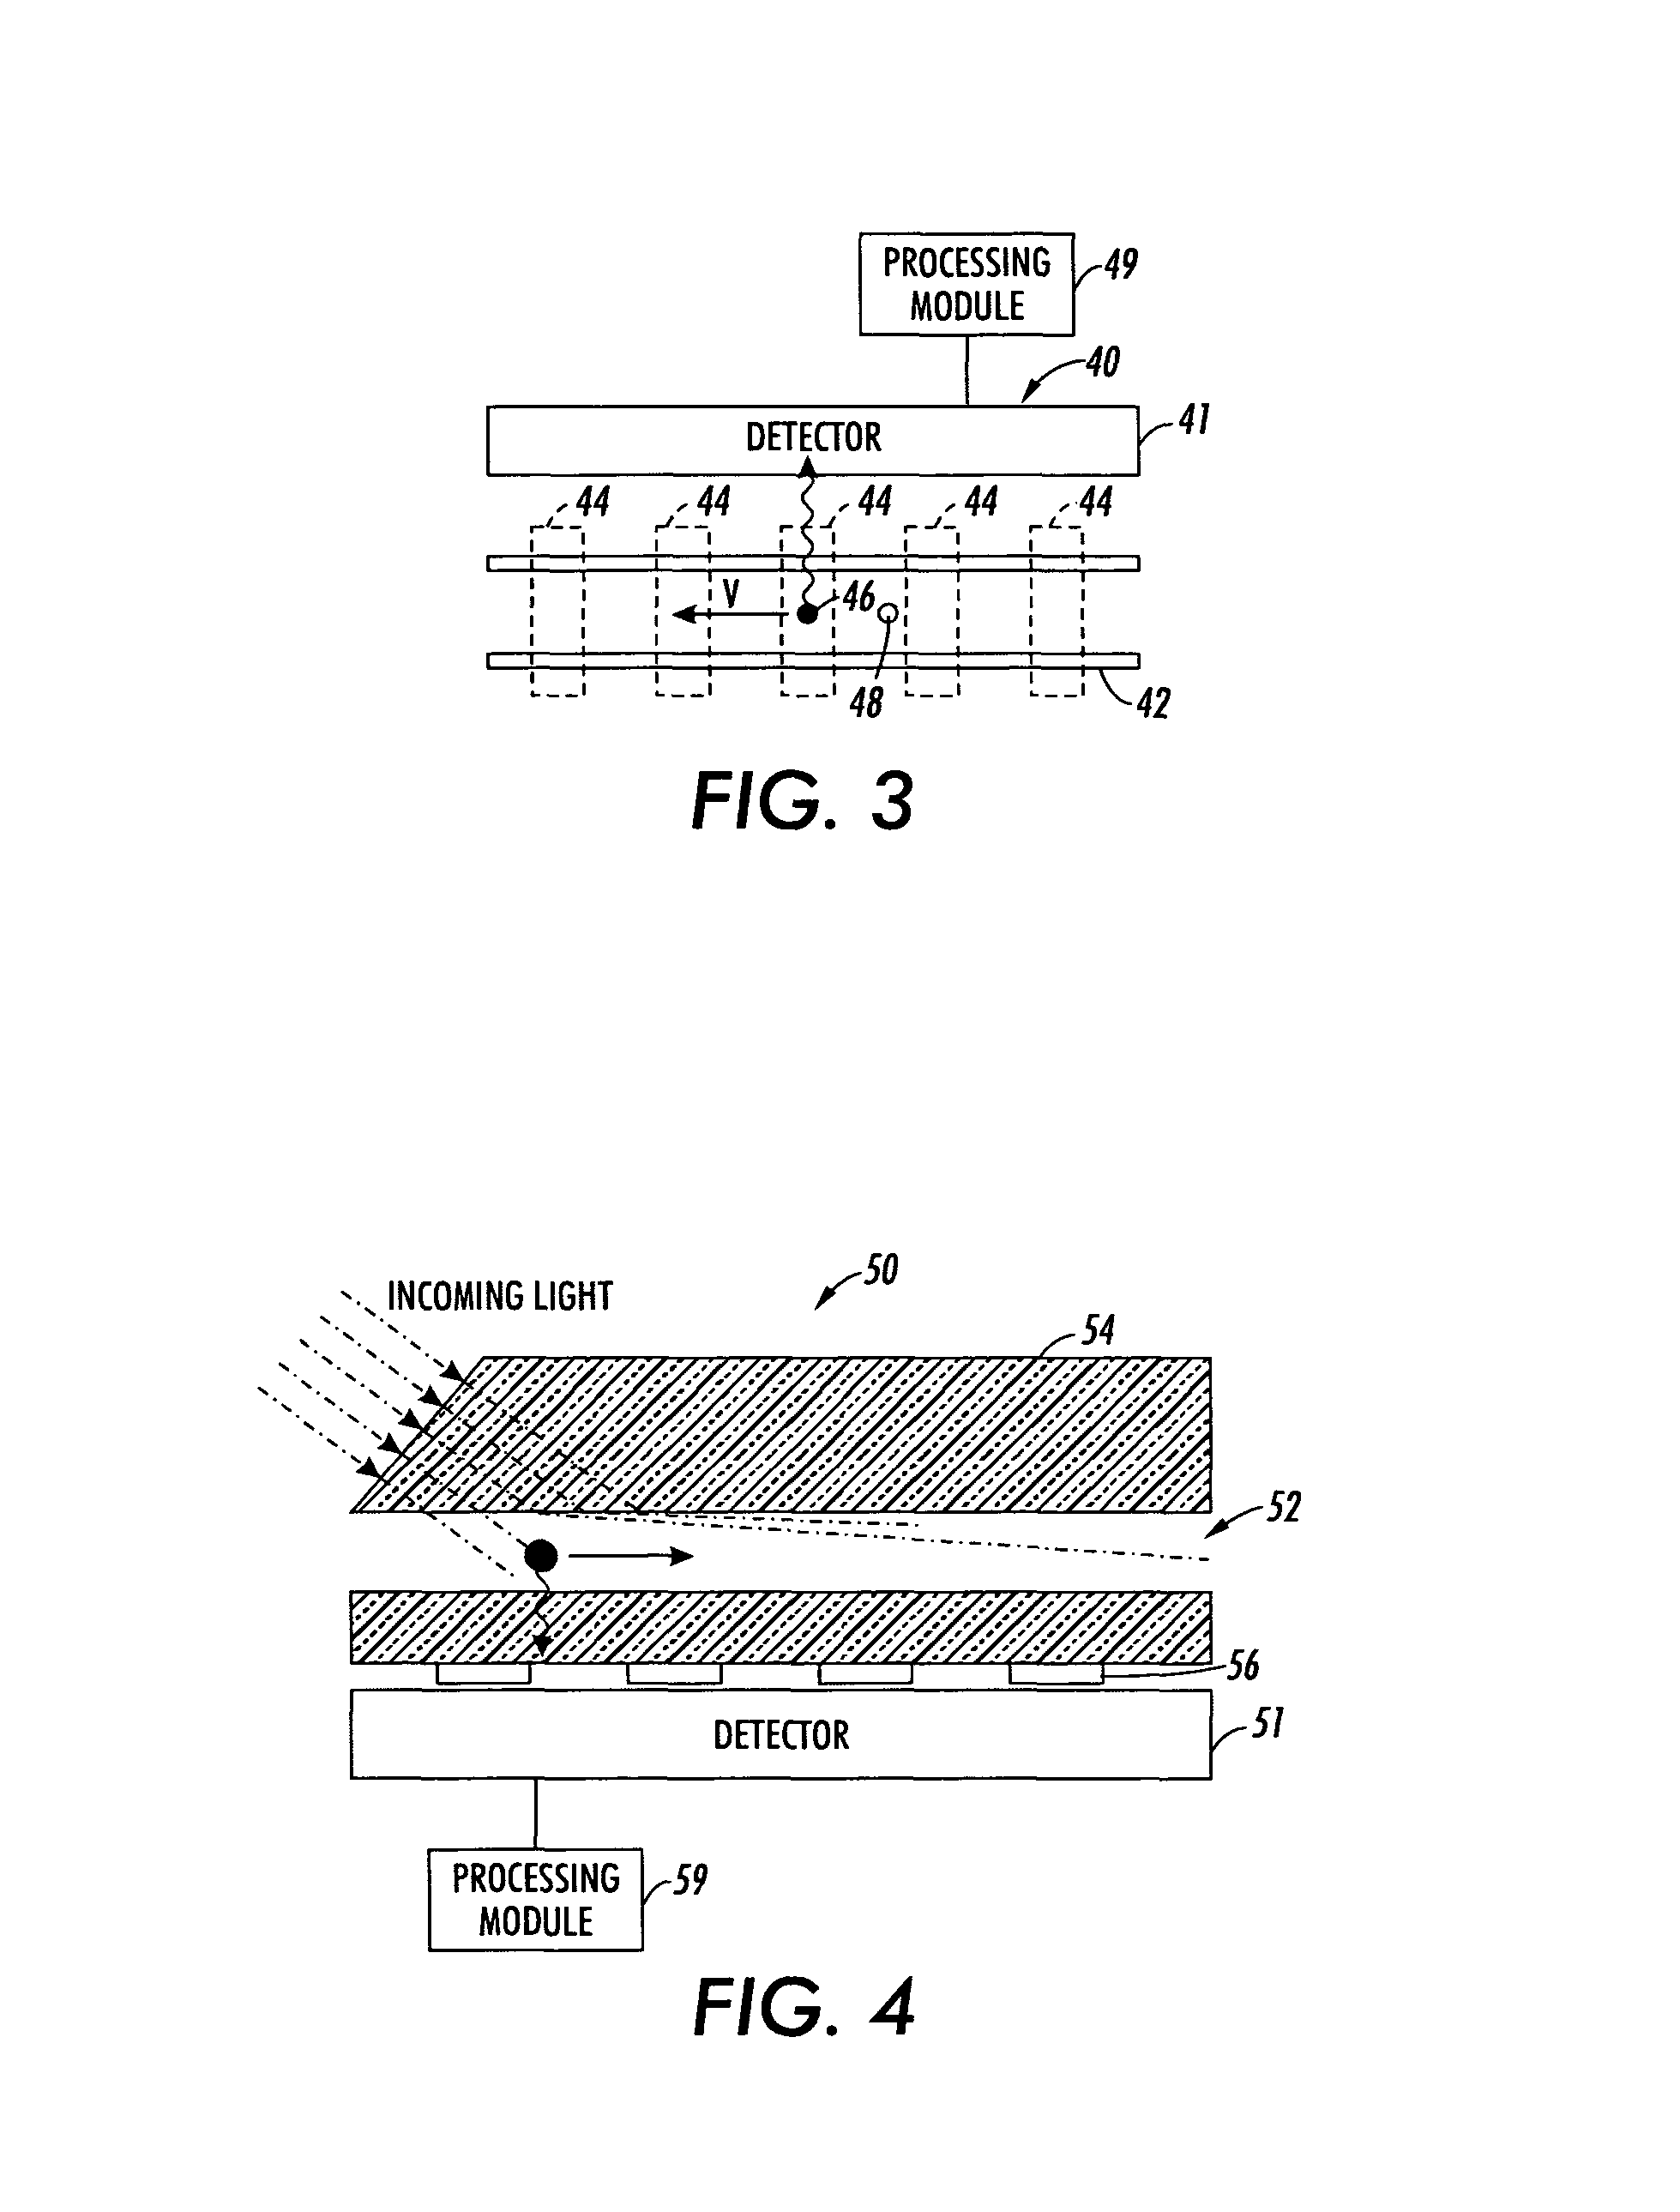 Method and system implementing spatially modulated excitation or emission for particle characterization with enhanced sensitivity